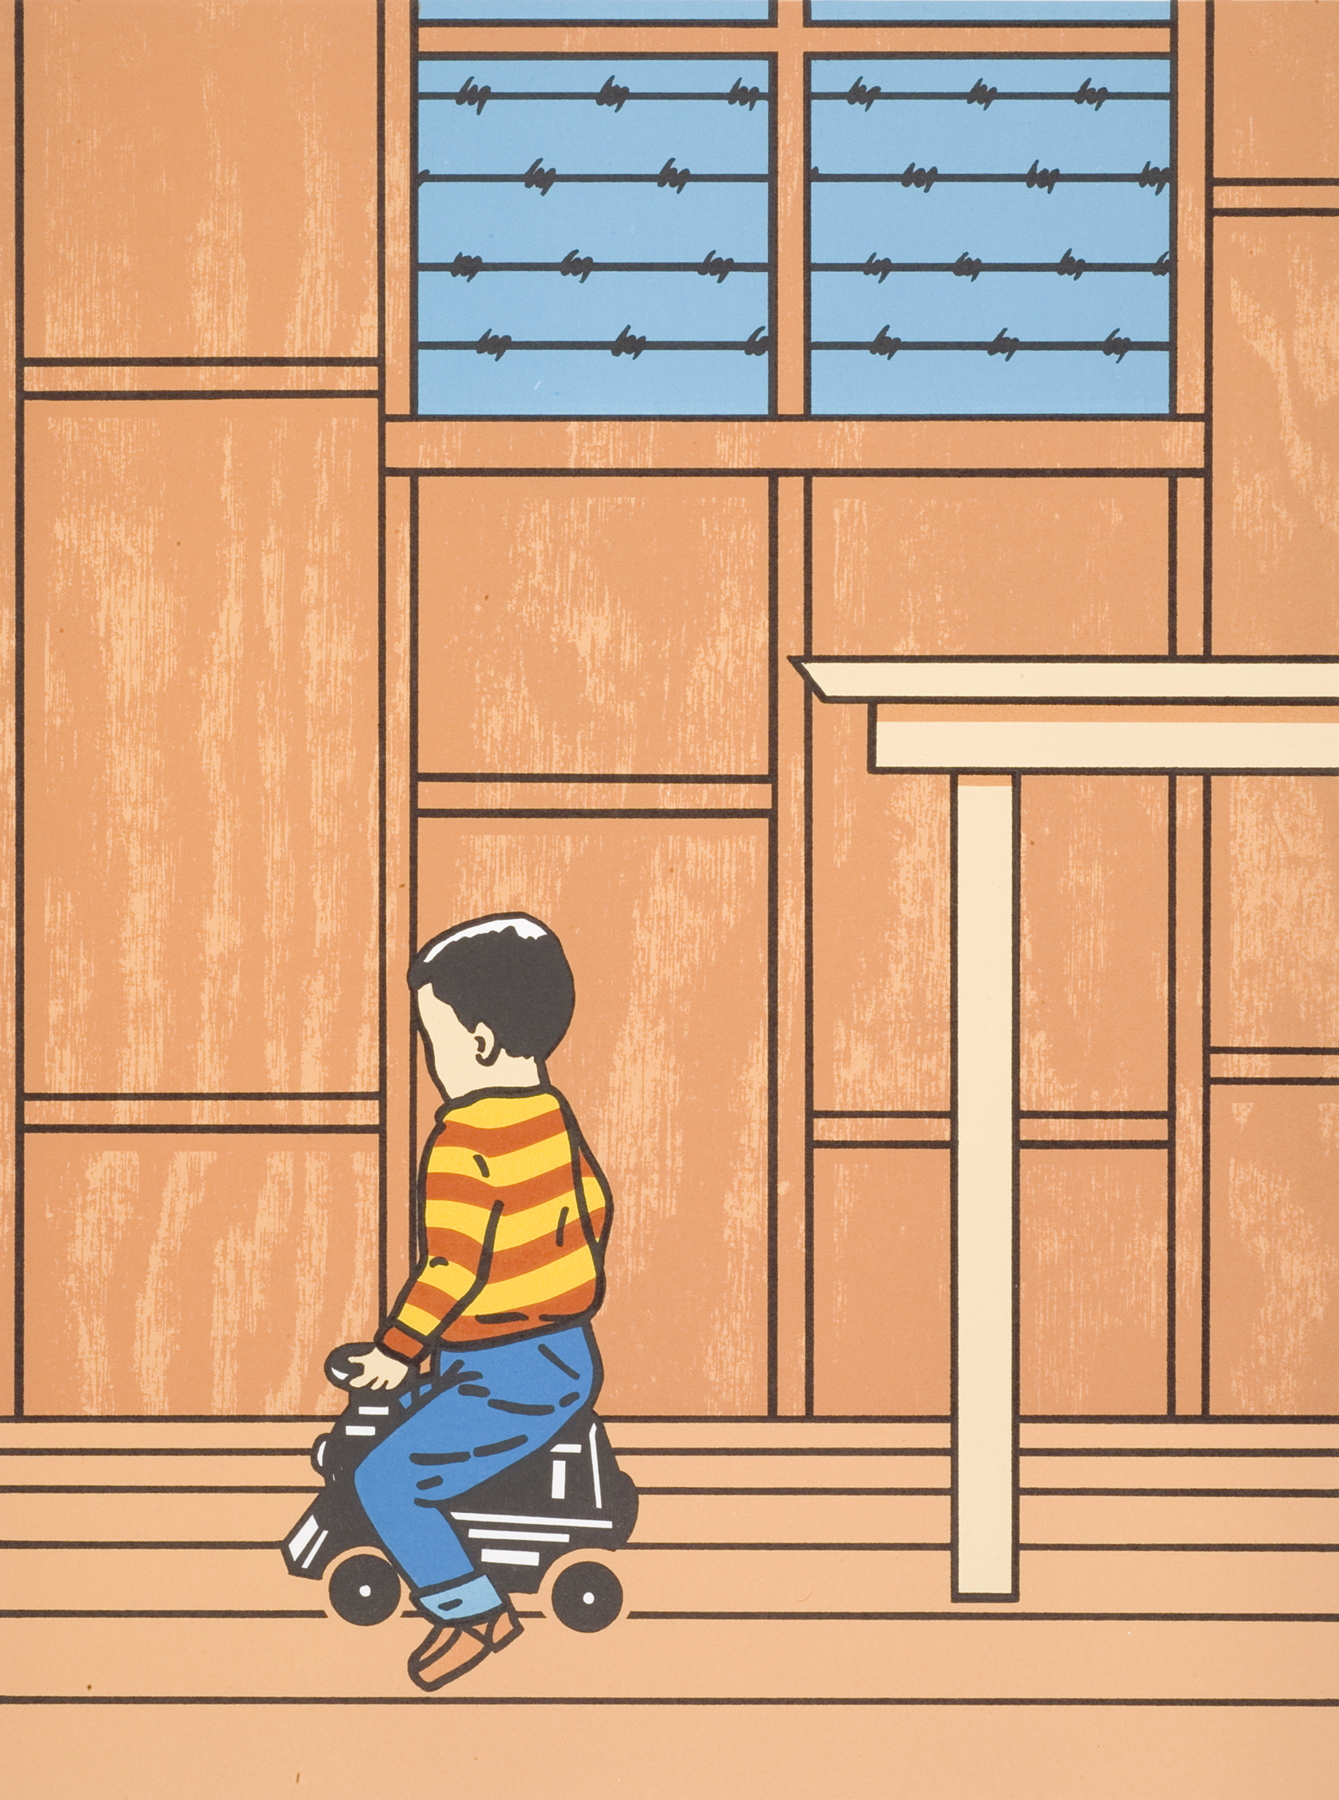 A child wearing an orange and yellow striped shirt and blue pants rides a wheeled toy and faces away from the viewer. The edge of a table is visible to the right of the child. At the top of the image is a window striped with barbed wire.